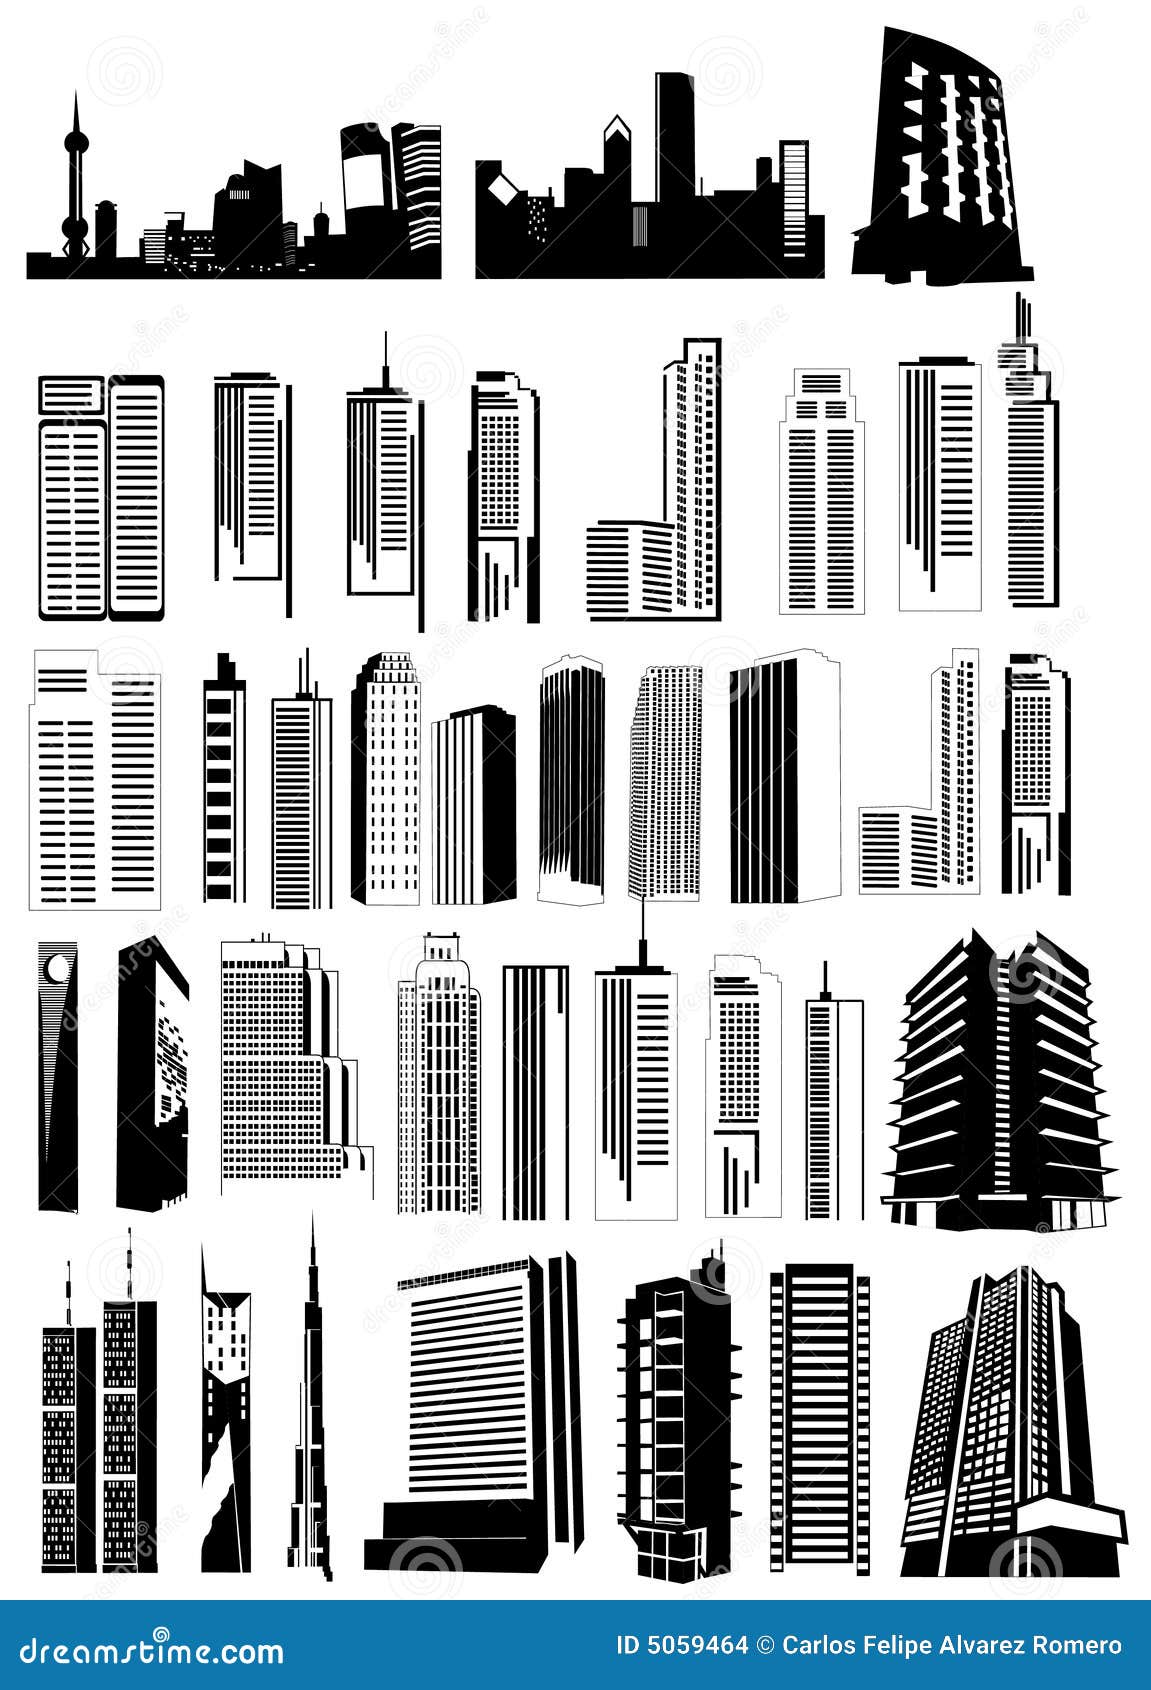 Buildings Shapes Vector Stock Images - Image: 5059464